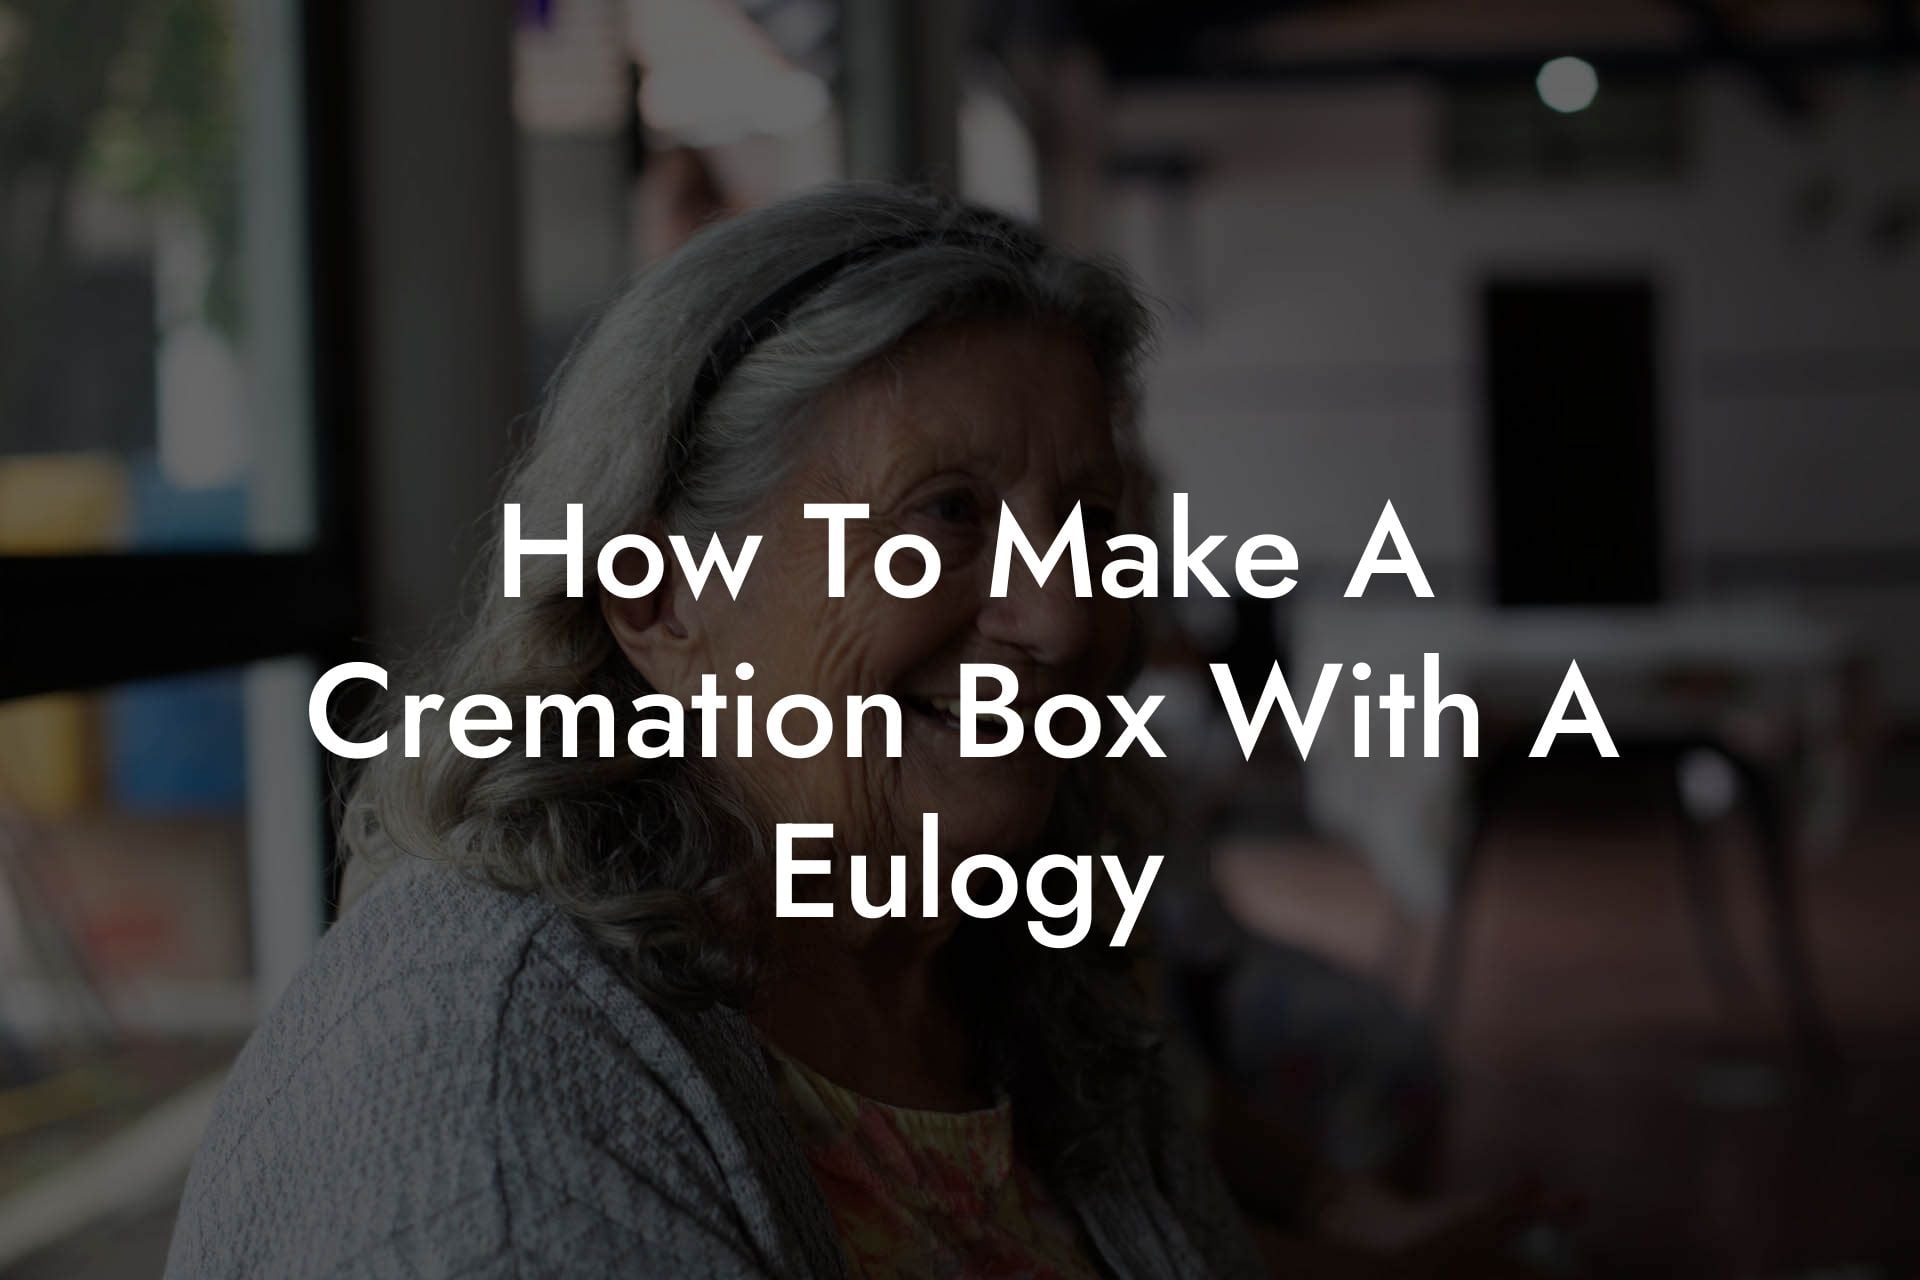 How To Make A Cremation Box With A Eulogy